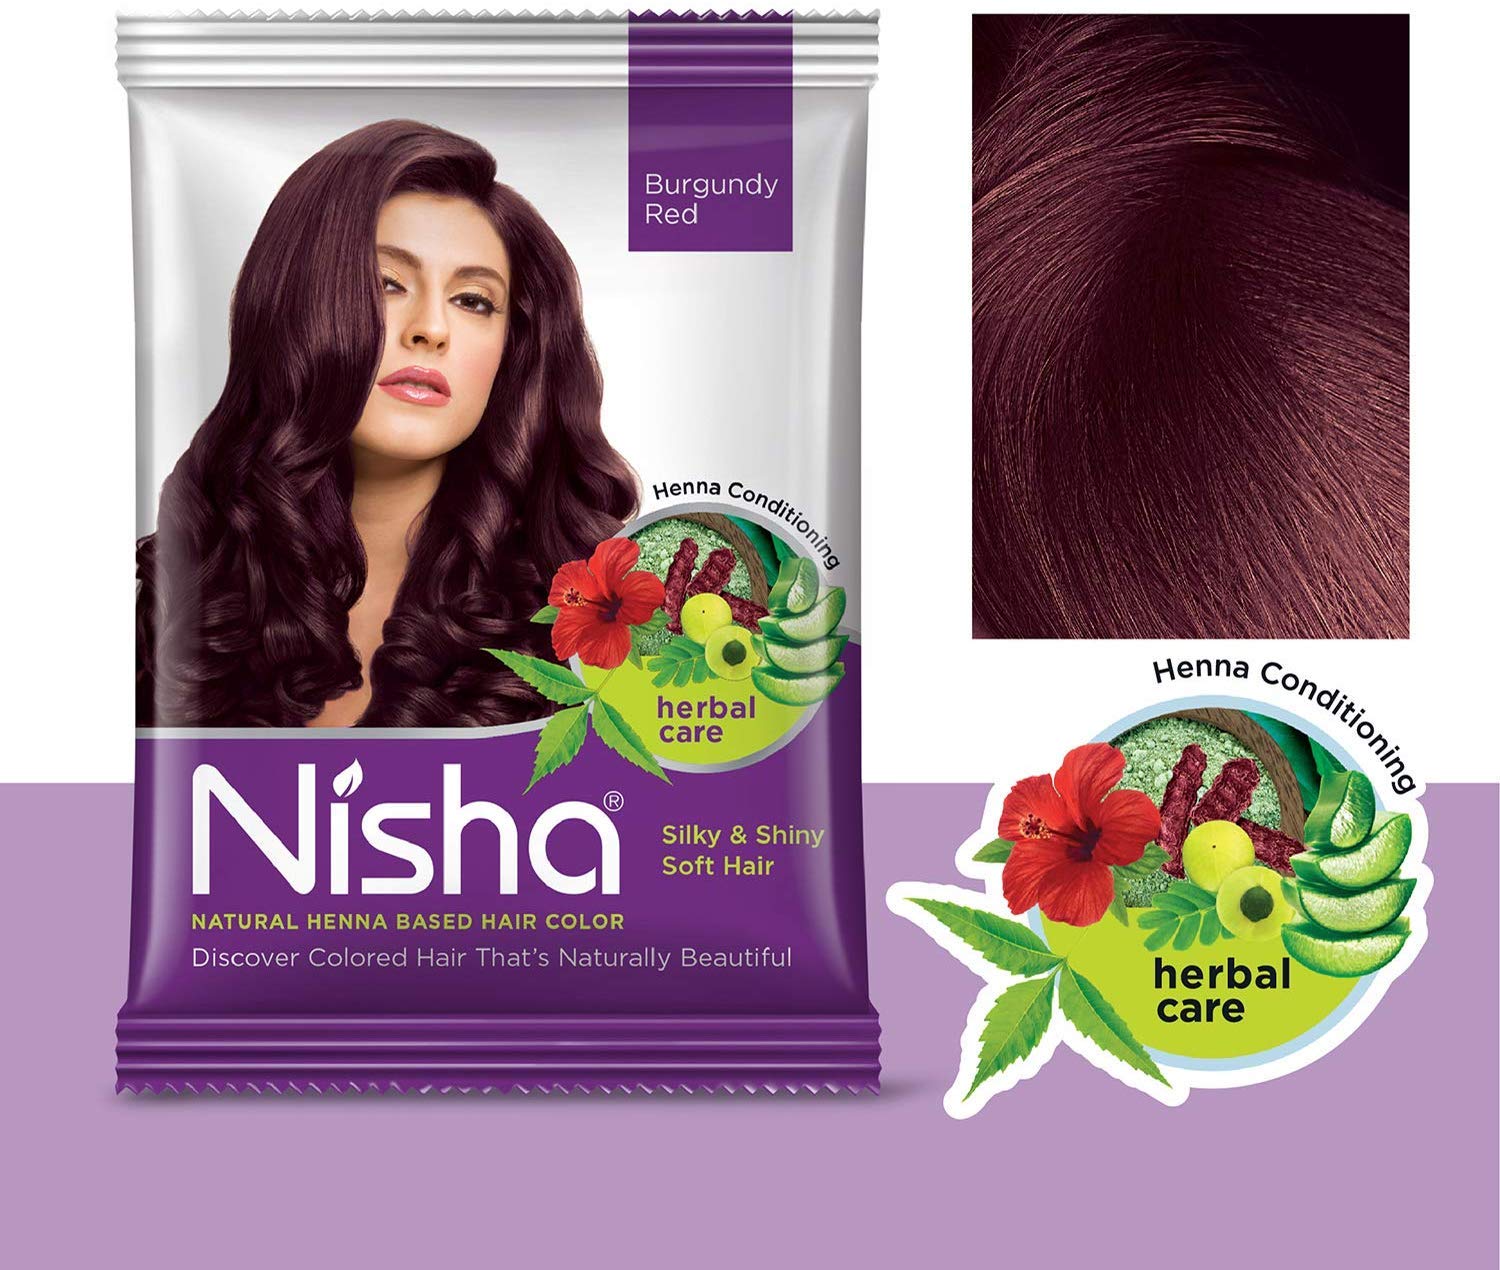 Nisha henna based hair color review|| How to apply Nisha Henna , how to use  nisha mendhi,निशा मेंहदी - YouTube